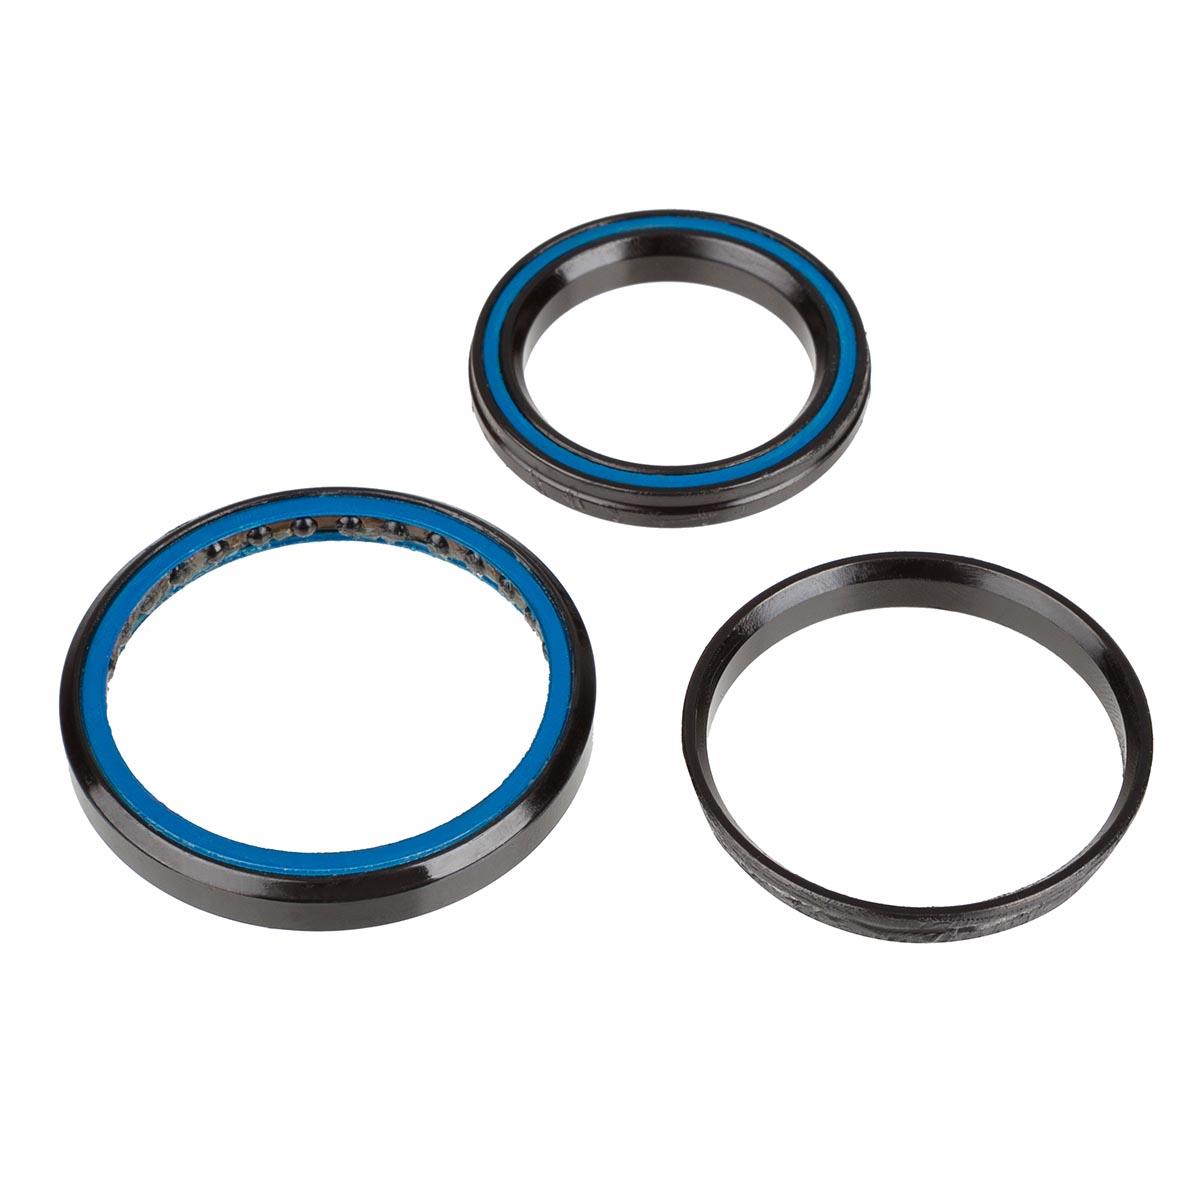 Cane Creek Headset bearings kit 40 Tapered, 41,8 mm and 52 mm, 36 Degree x 45 Degree